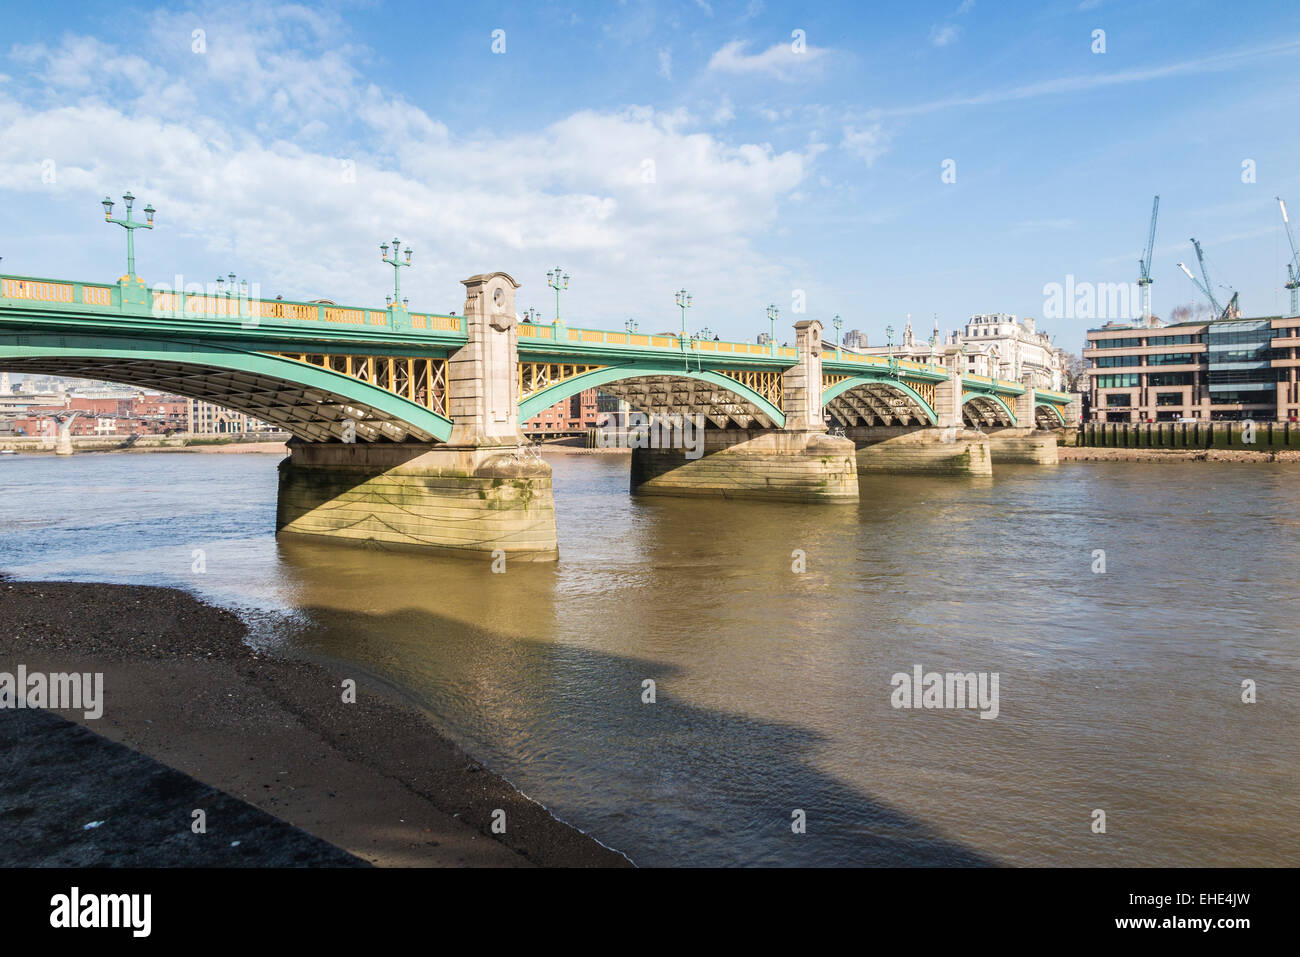 Southwark Bridge, a road bridge crossing the River Thames, London seen from the south bank on a fine, sunny day with blue sky and fluffy white clouds Stock Photo